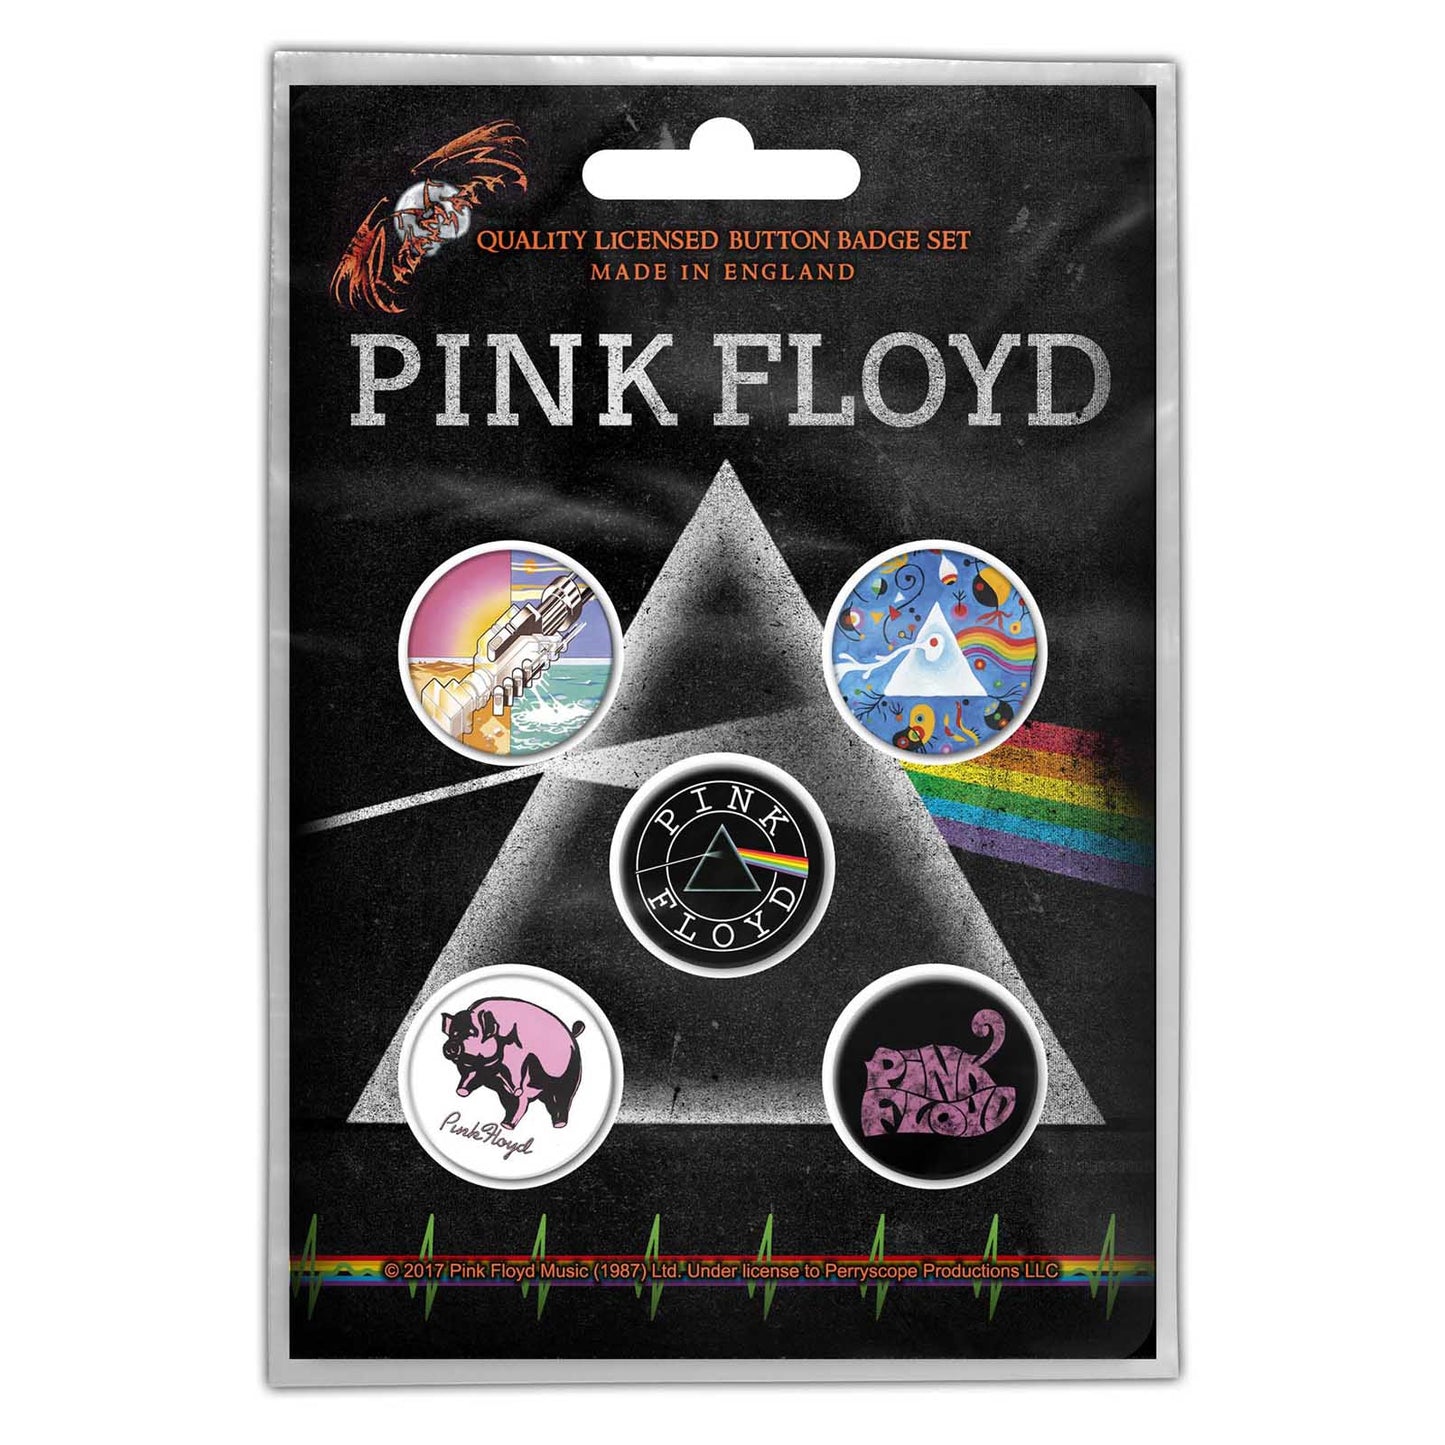 PINK FLOYD BUTTON BADGE PACK: PRISM